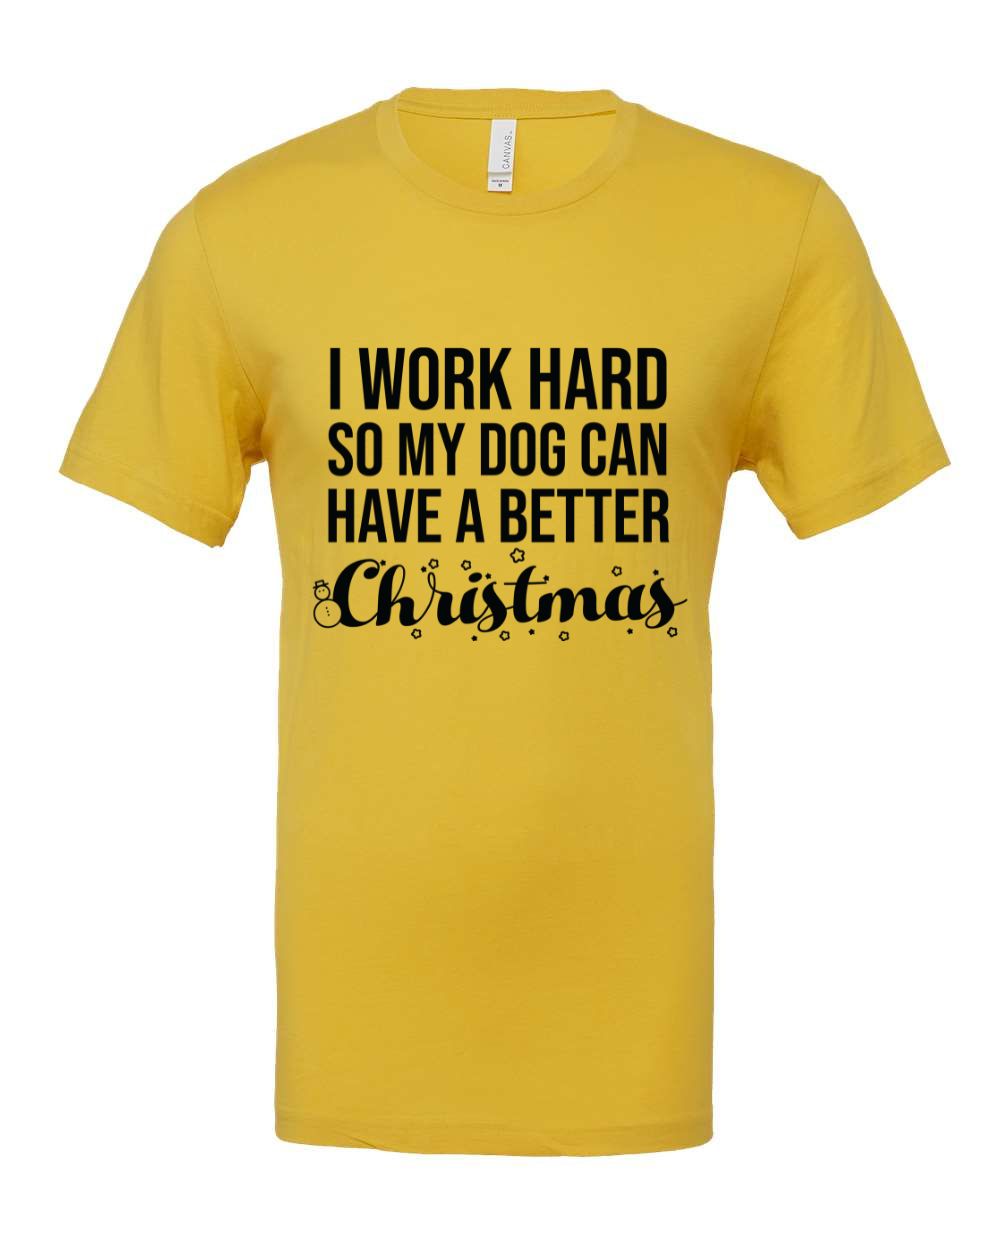 I Work Hard So My Dog Can Have A Better Christmas T-Shirt